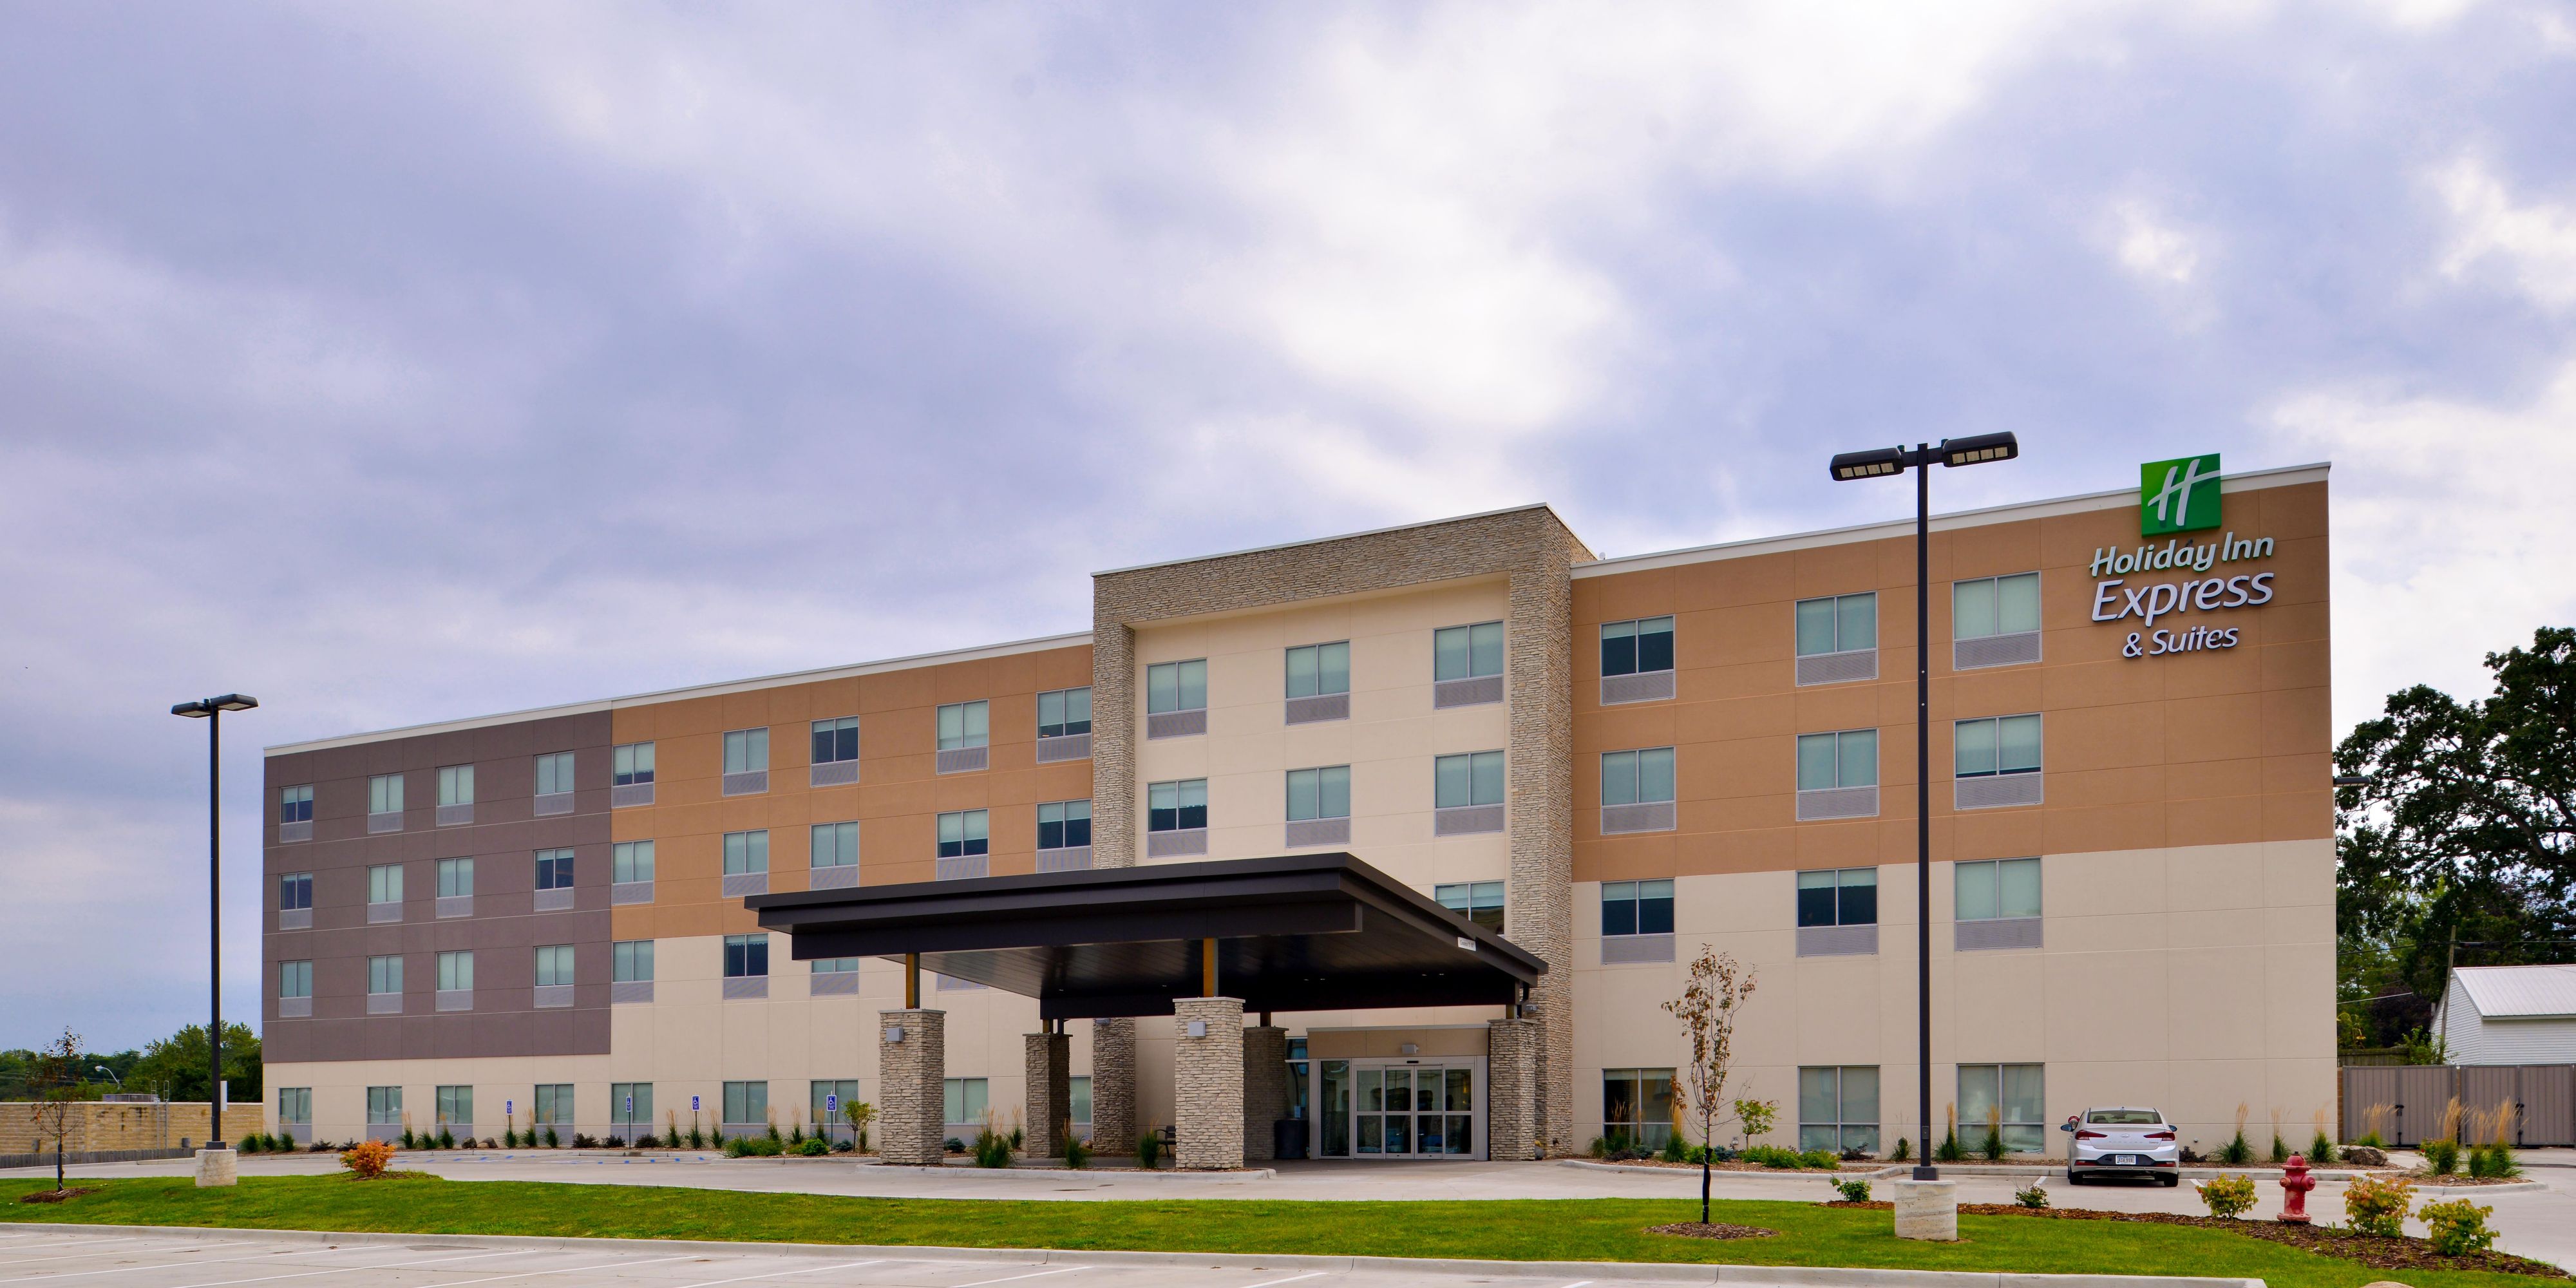 Travelling with a larger vehicle? The Holiday Inn Express Ottumwa has Bus and Truck parking.